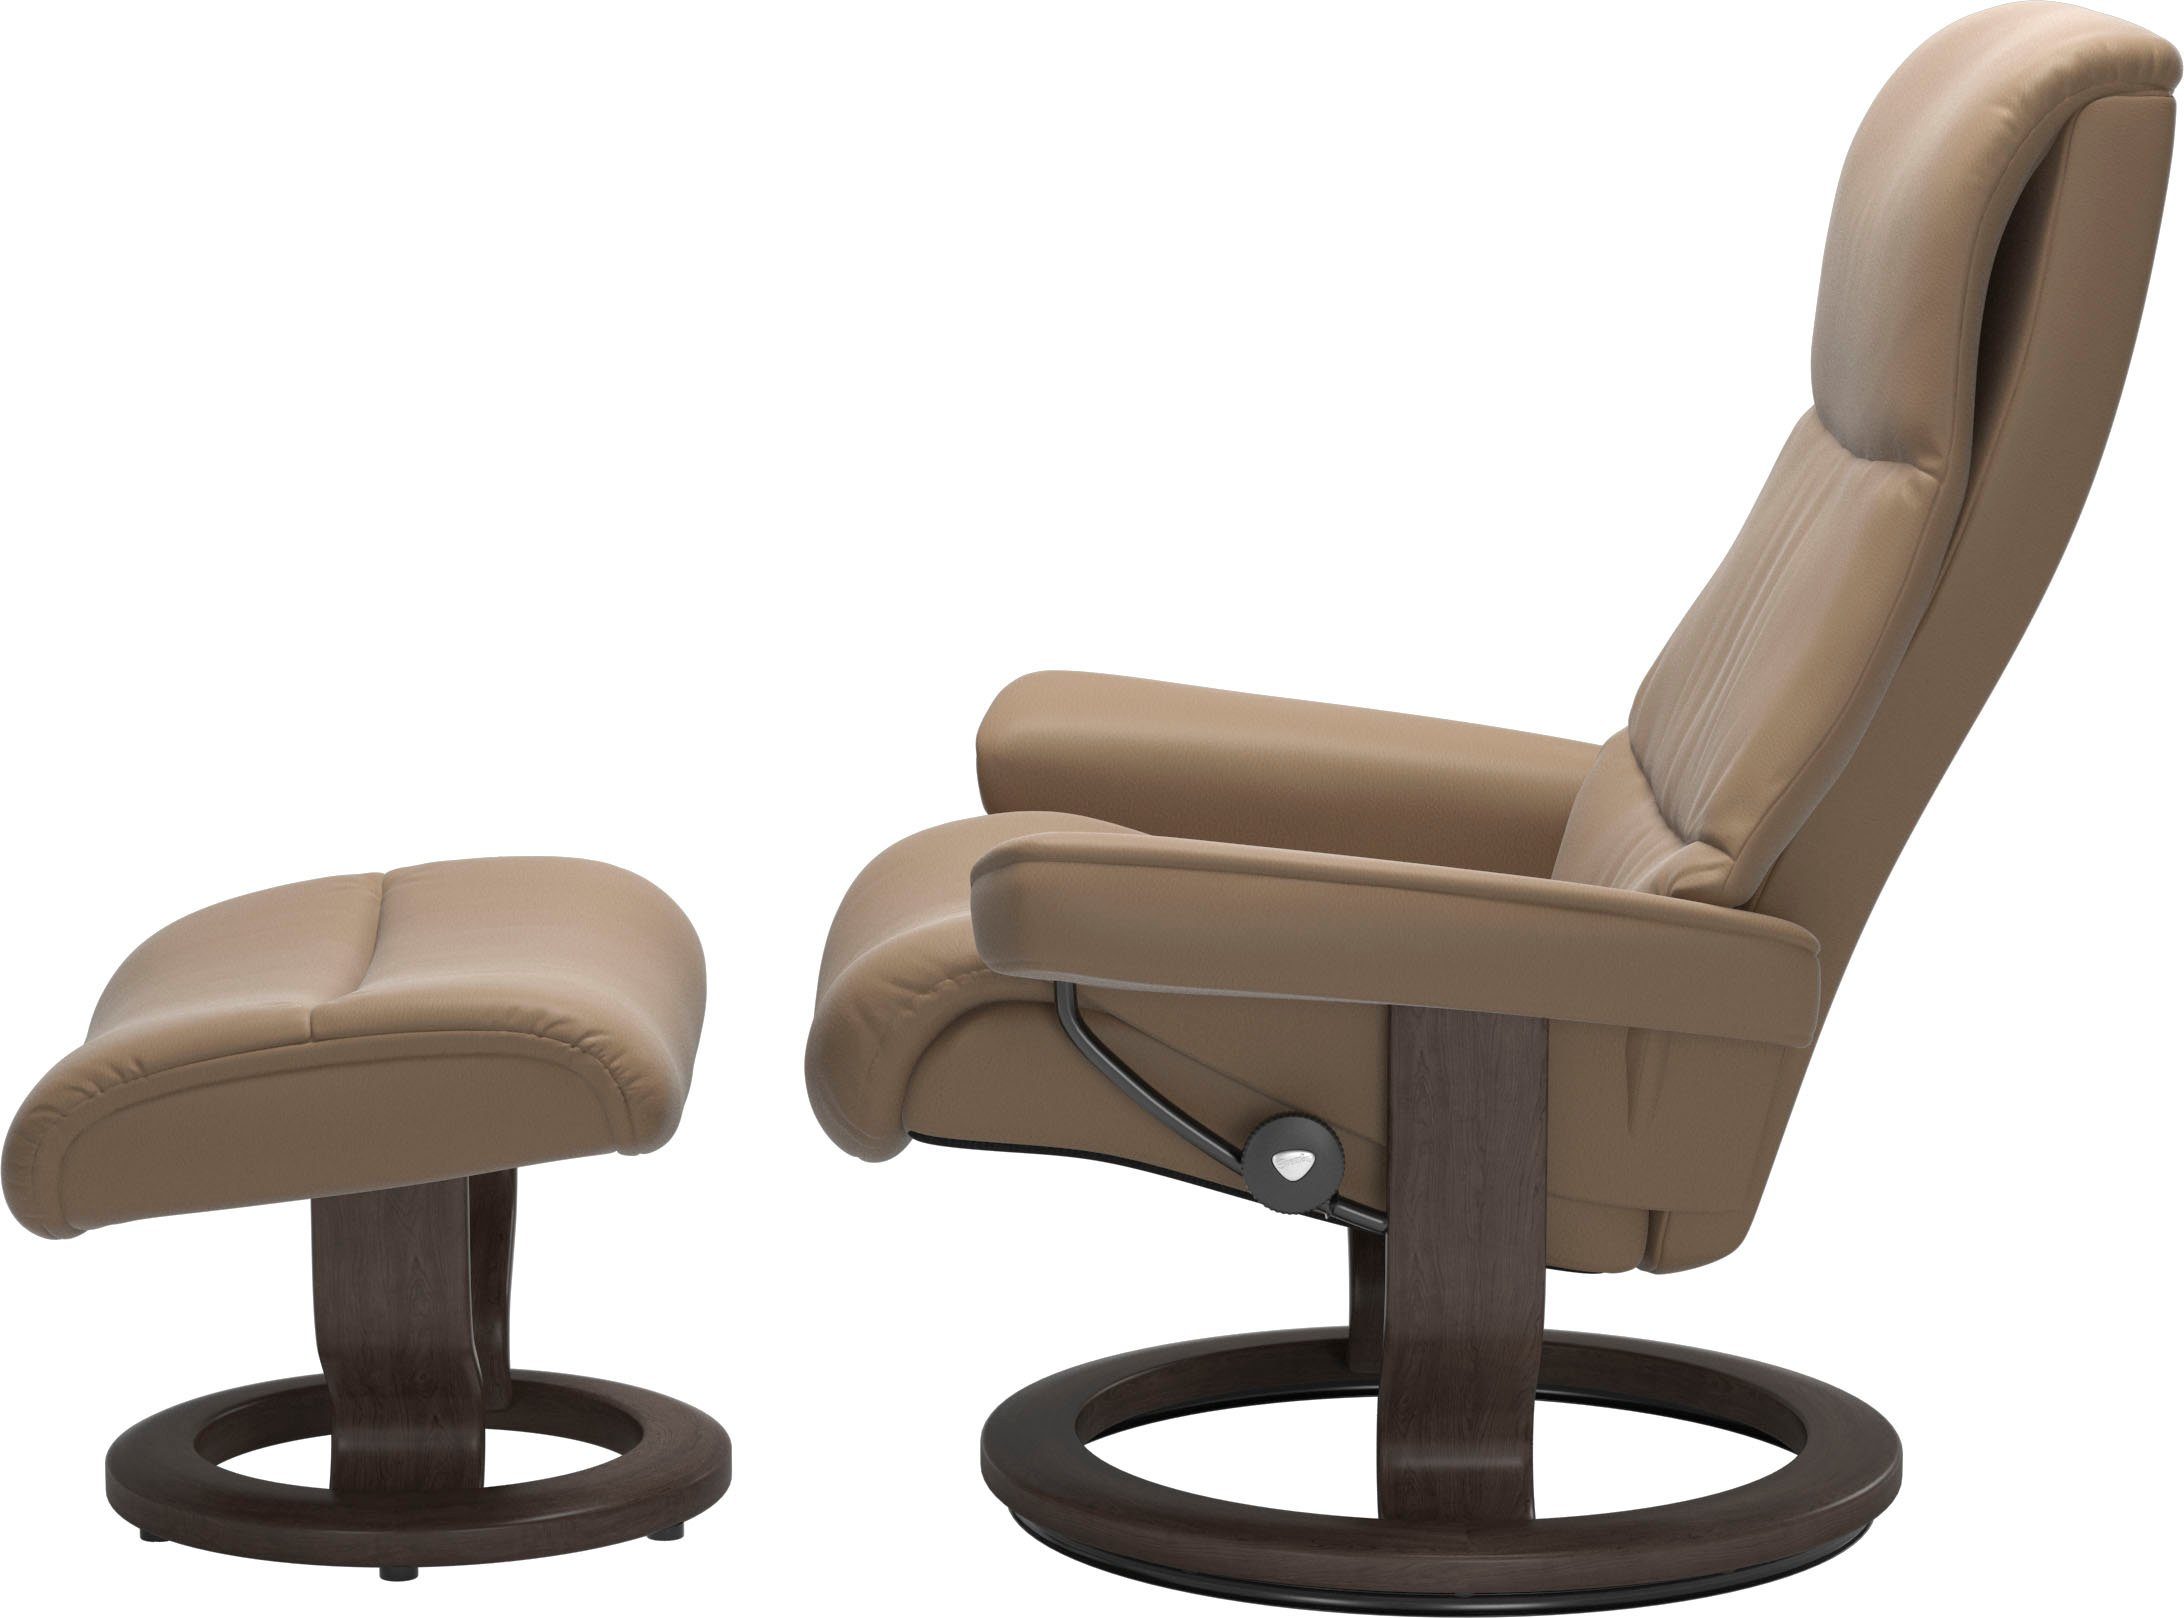 Stressless® Relaxsessel Classic mit Größe Base, M,Gestell View, Wenge